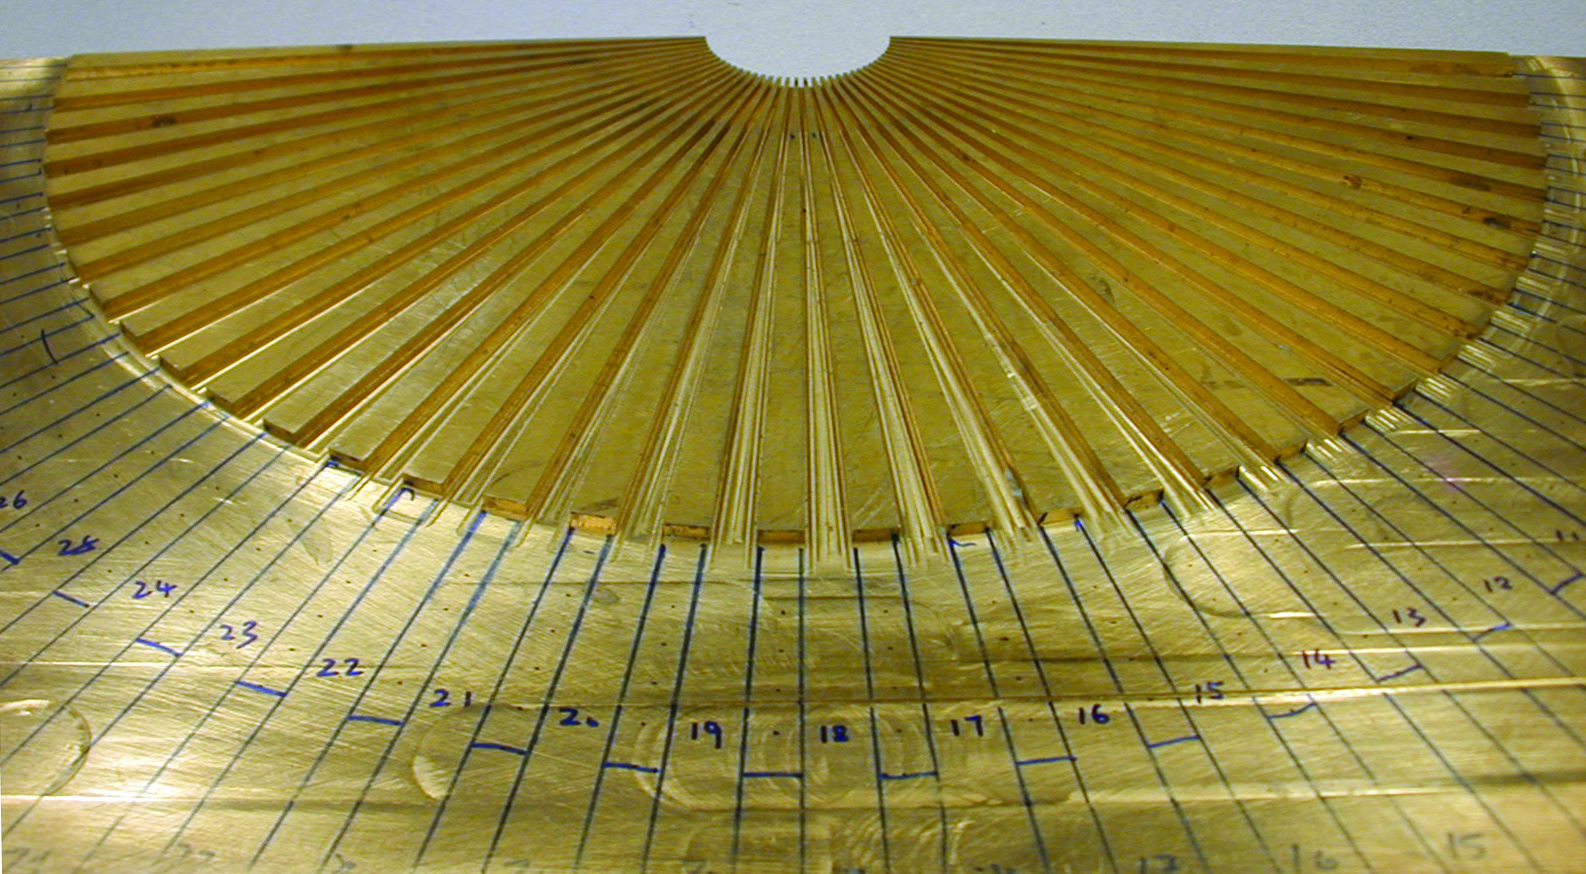 The acoustic hyperlens is fashioned from 36 brass fins arranged in the shape of a hand-held fan. Each fin is approximately 20 centimeters long and three millimeters thick. (Courtesy of Xiang Zhang research group)